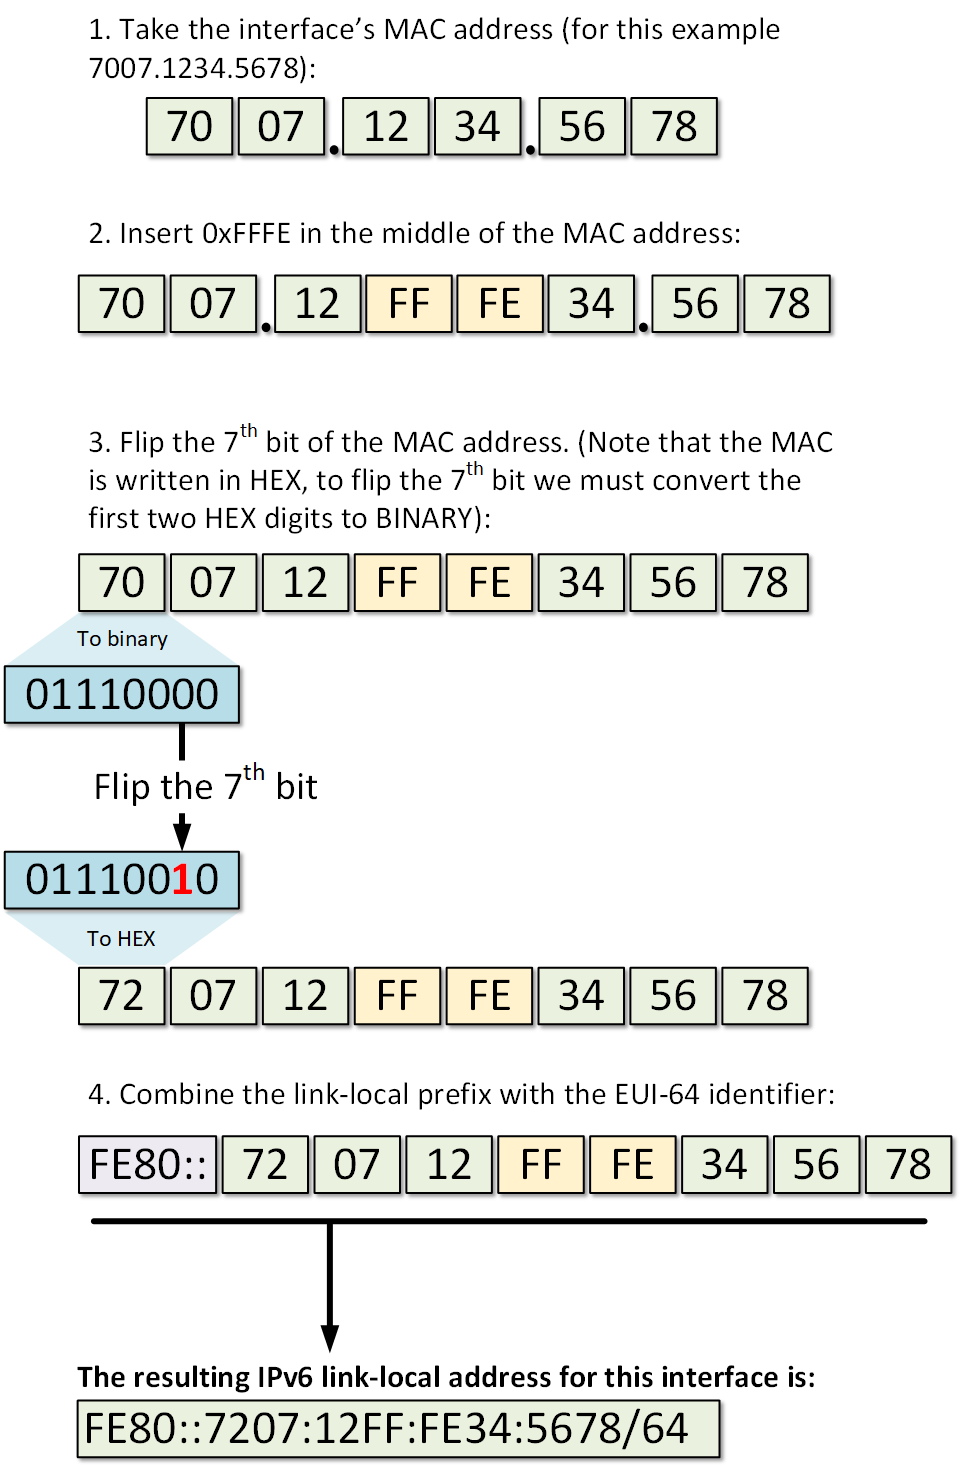 Generating a link-local address from interface's MAC address